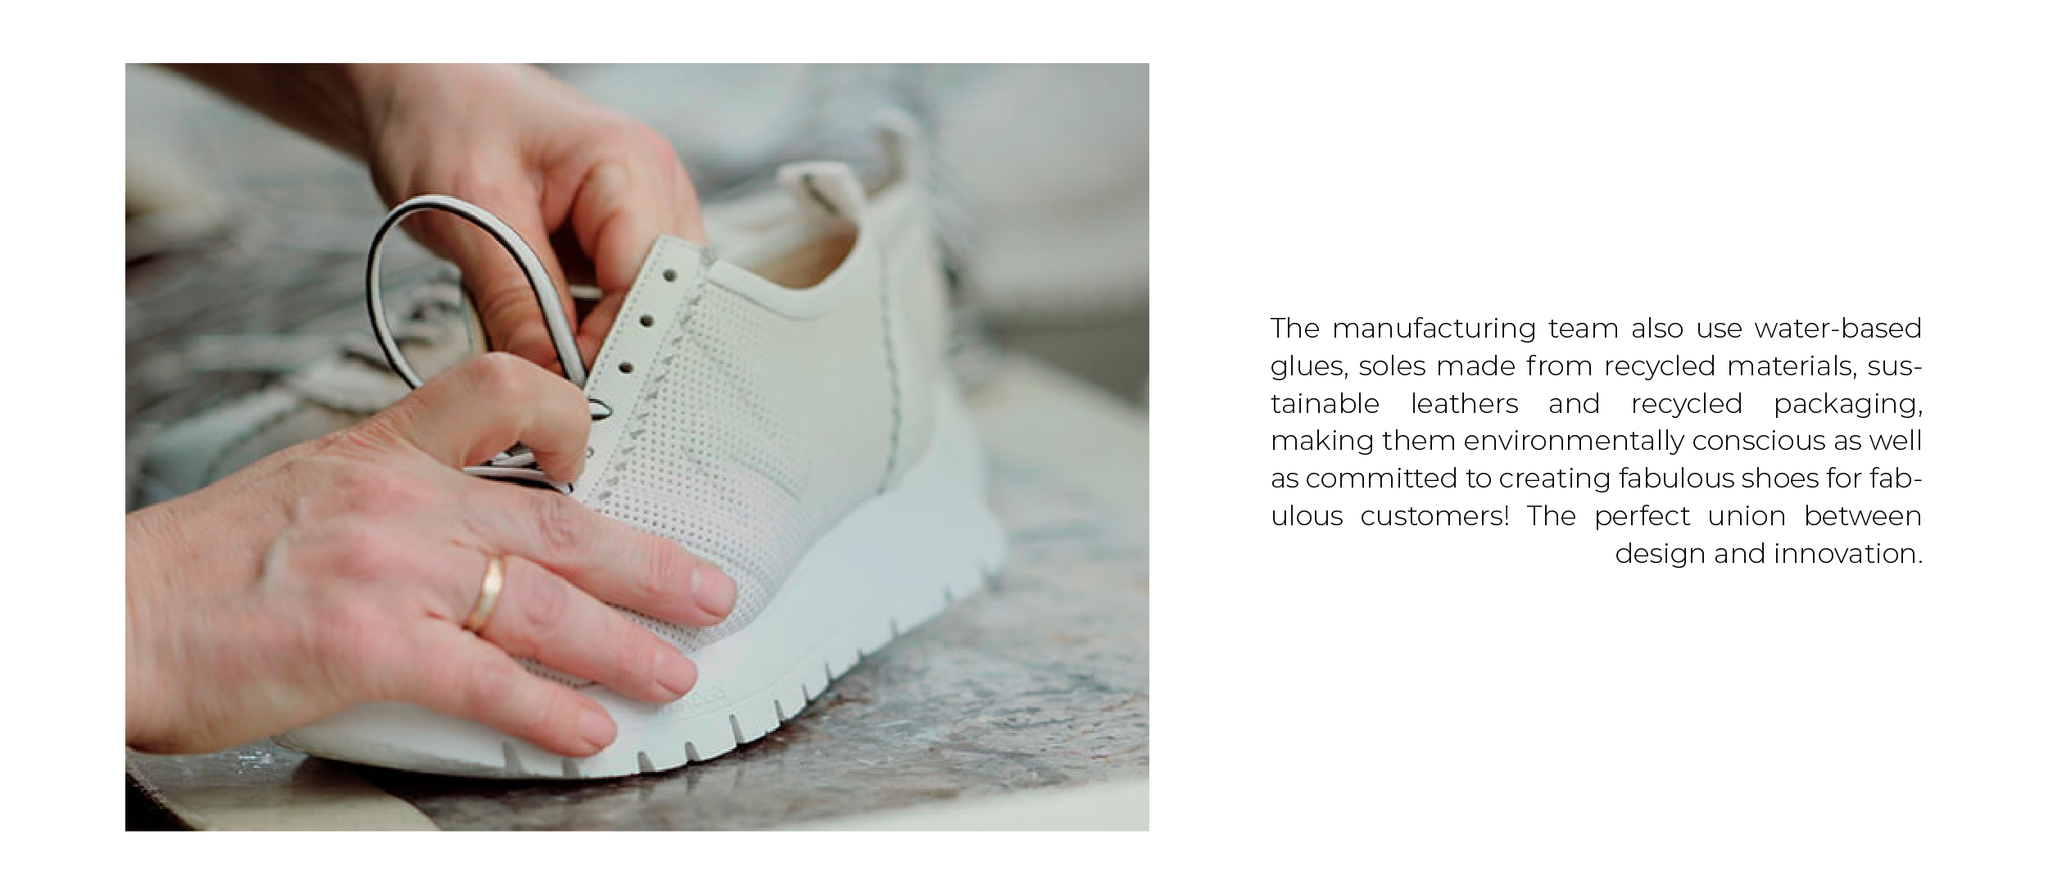 The manufacturing team also use water-based glues, soles made from recycled materials, sustainable leathers and recycled packaging, making them environmentally conscious as well as committed to creating fabulous shoes for fabulous customers! The perfect union between design and innovation.